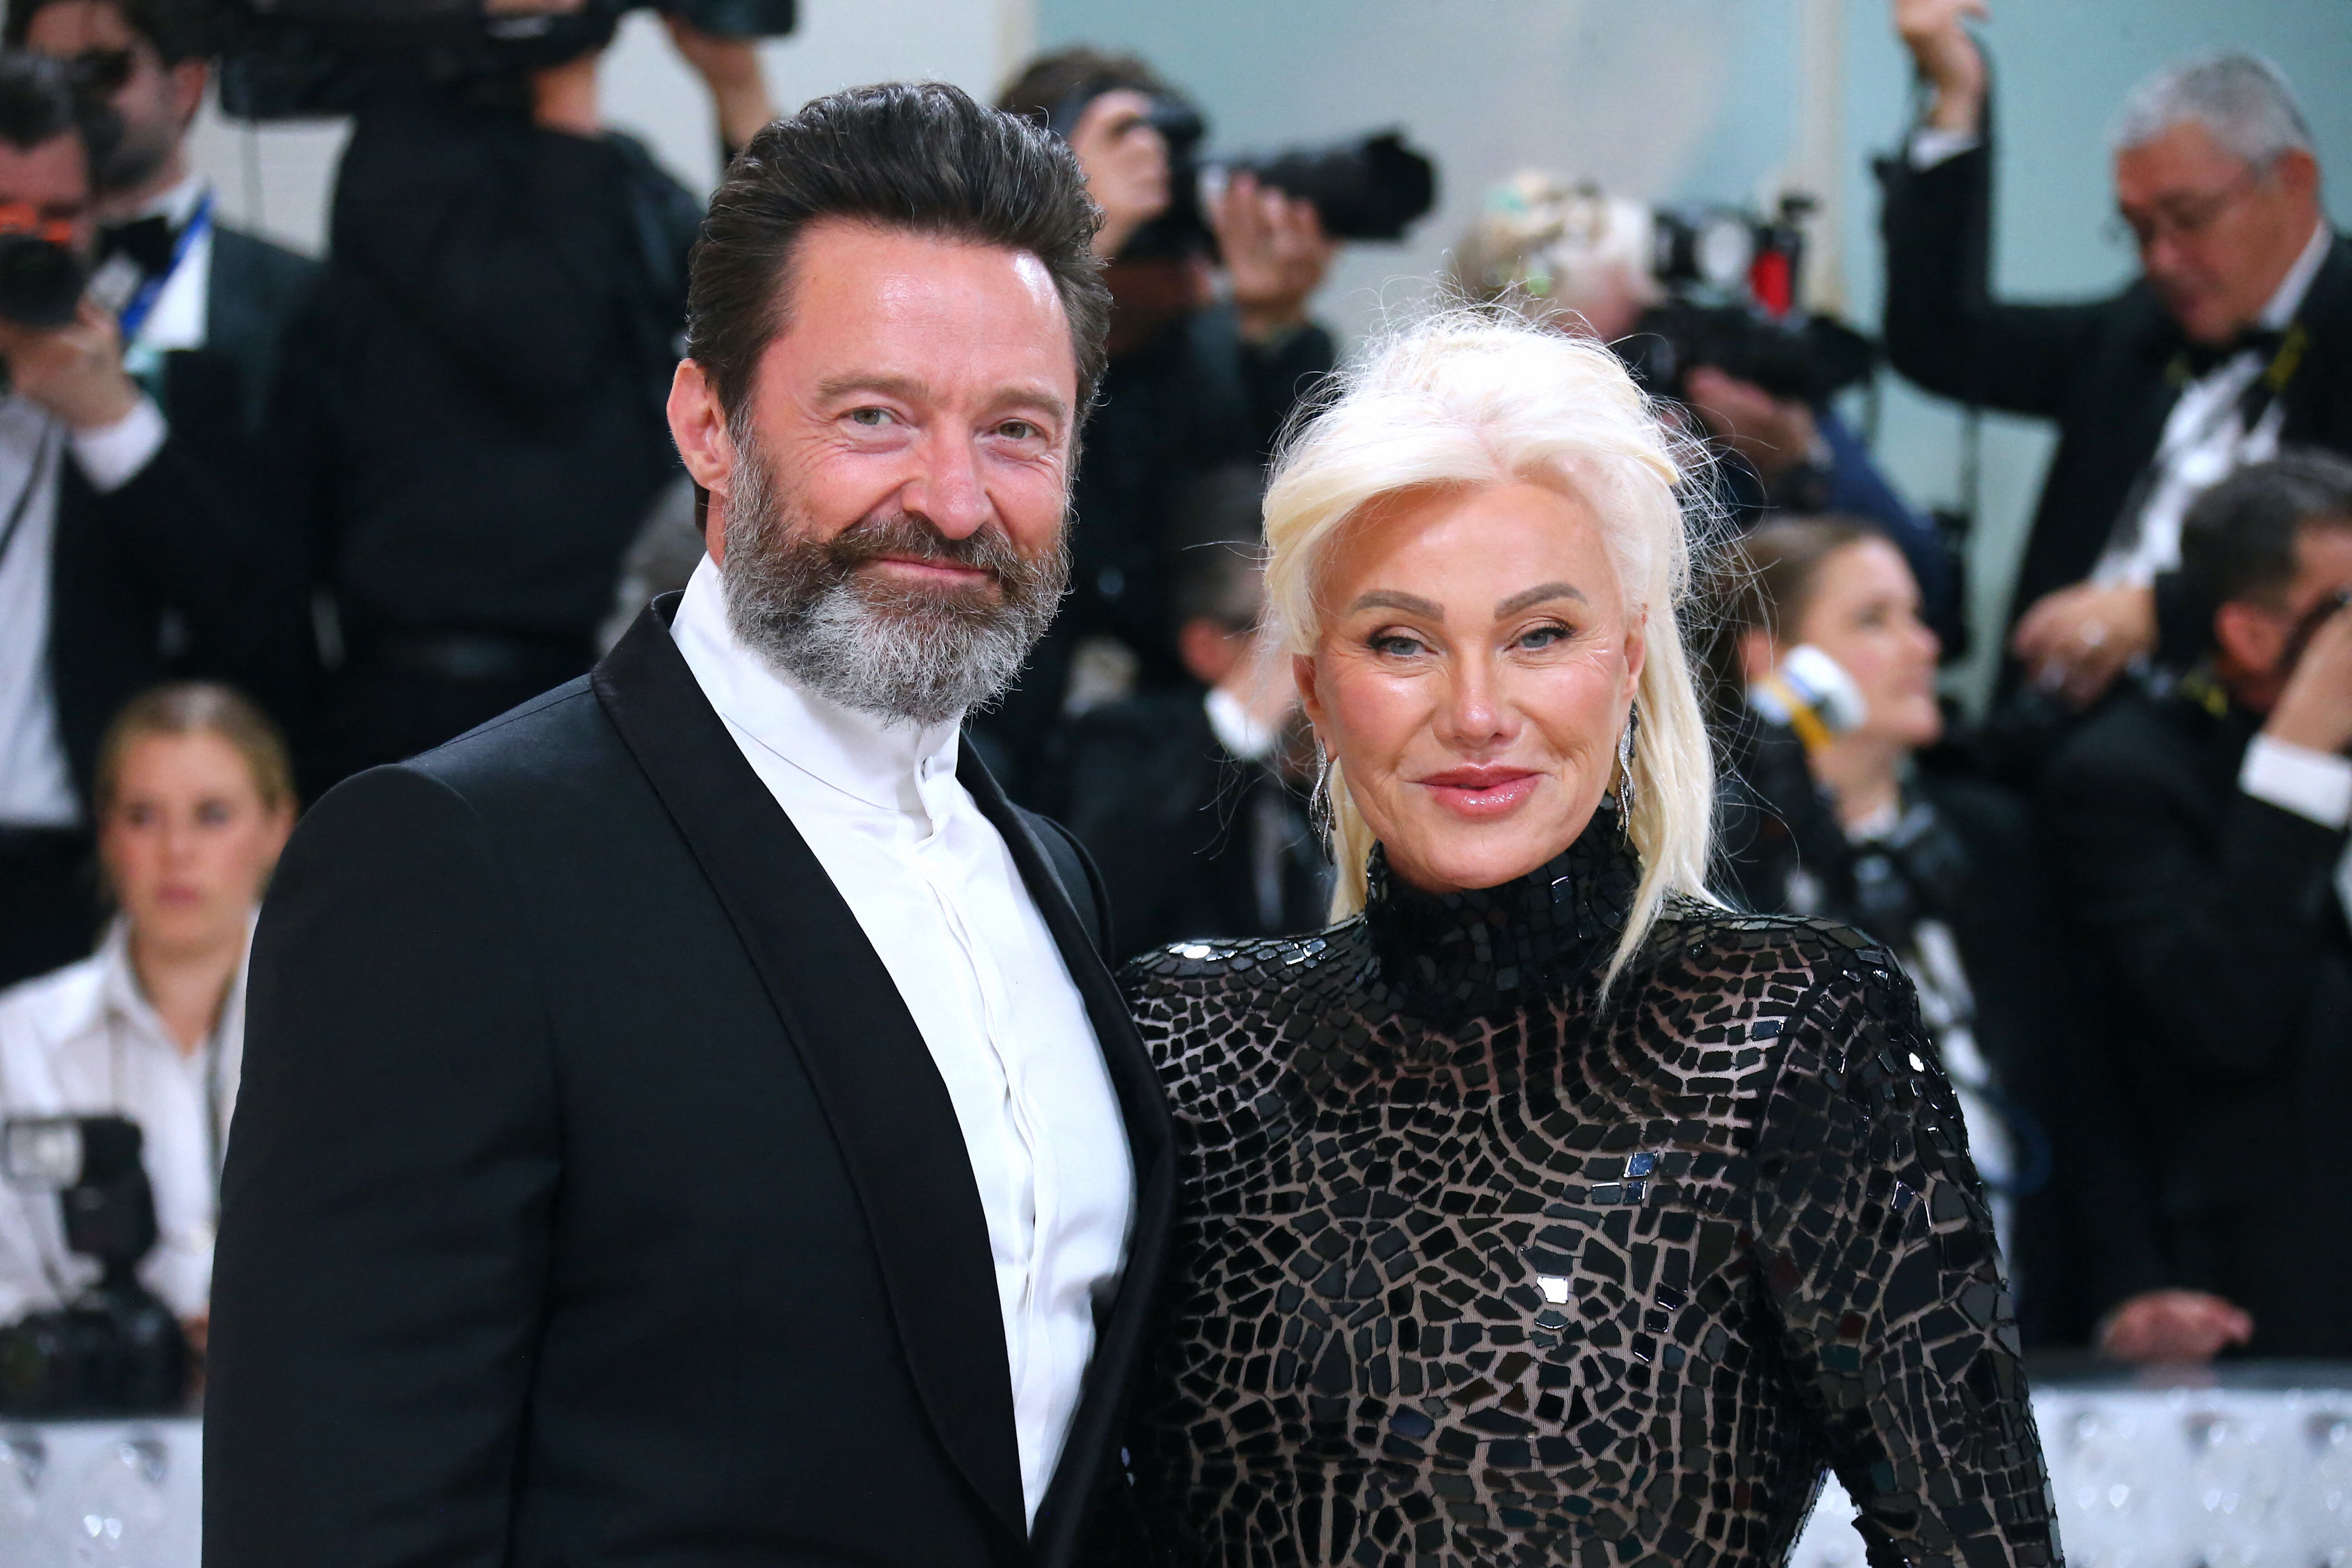 <p><span>There's a 13-year age difference between Tony-winning Academy Award nominee Hugh Jackman and Deborra-lee Furness -- who in September 2023 shocked fans when they announced they'd split after 27 years of marriage.</span></p><p>The former couple met in 1995 on the set of "Correlli," an Australian television series. They married less than a year later when Hugh was 27 and Deborra-lee was 40. They share two adult children, Oscar and Ava.</p>